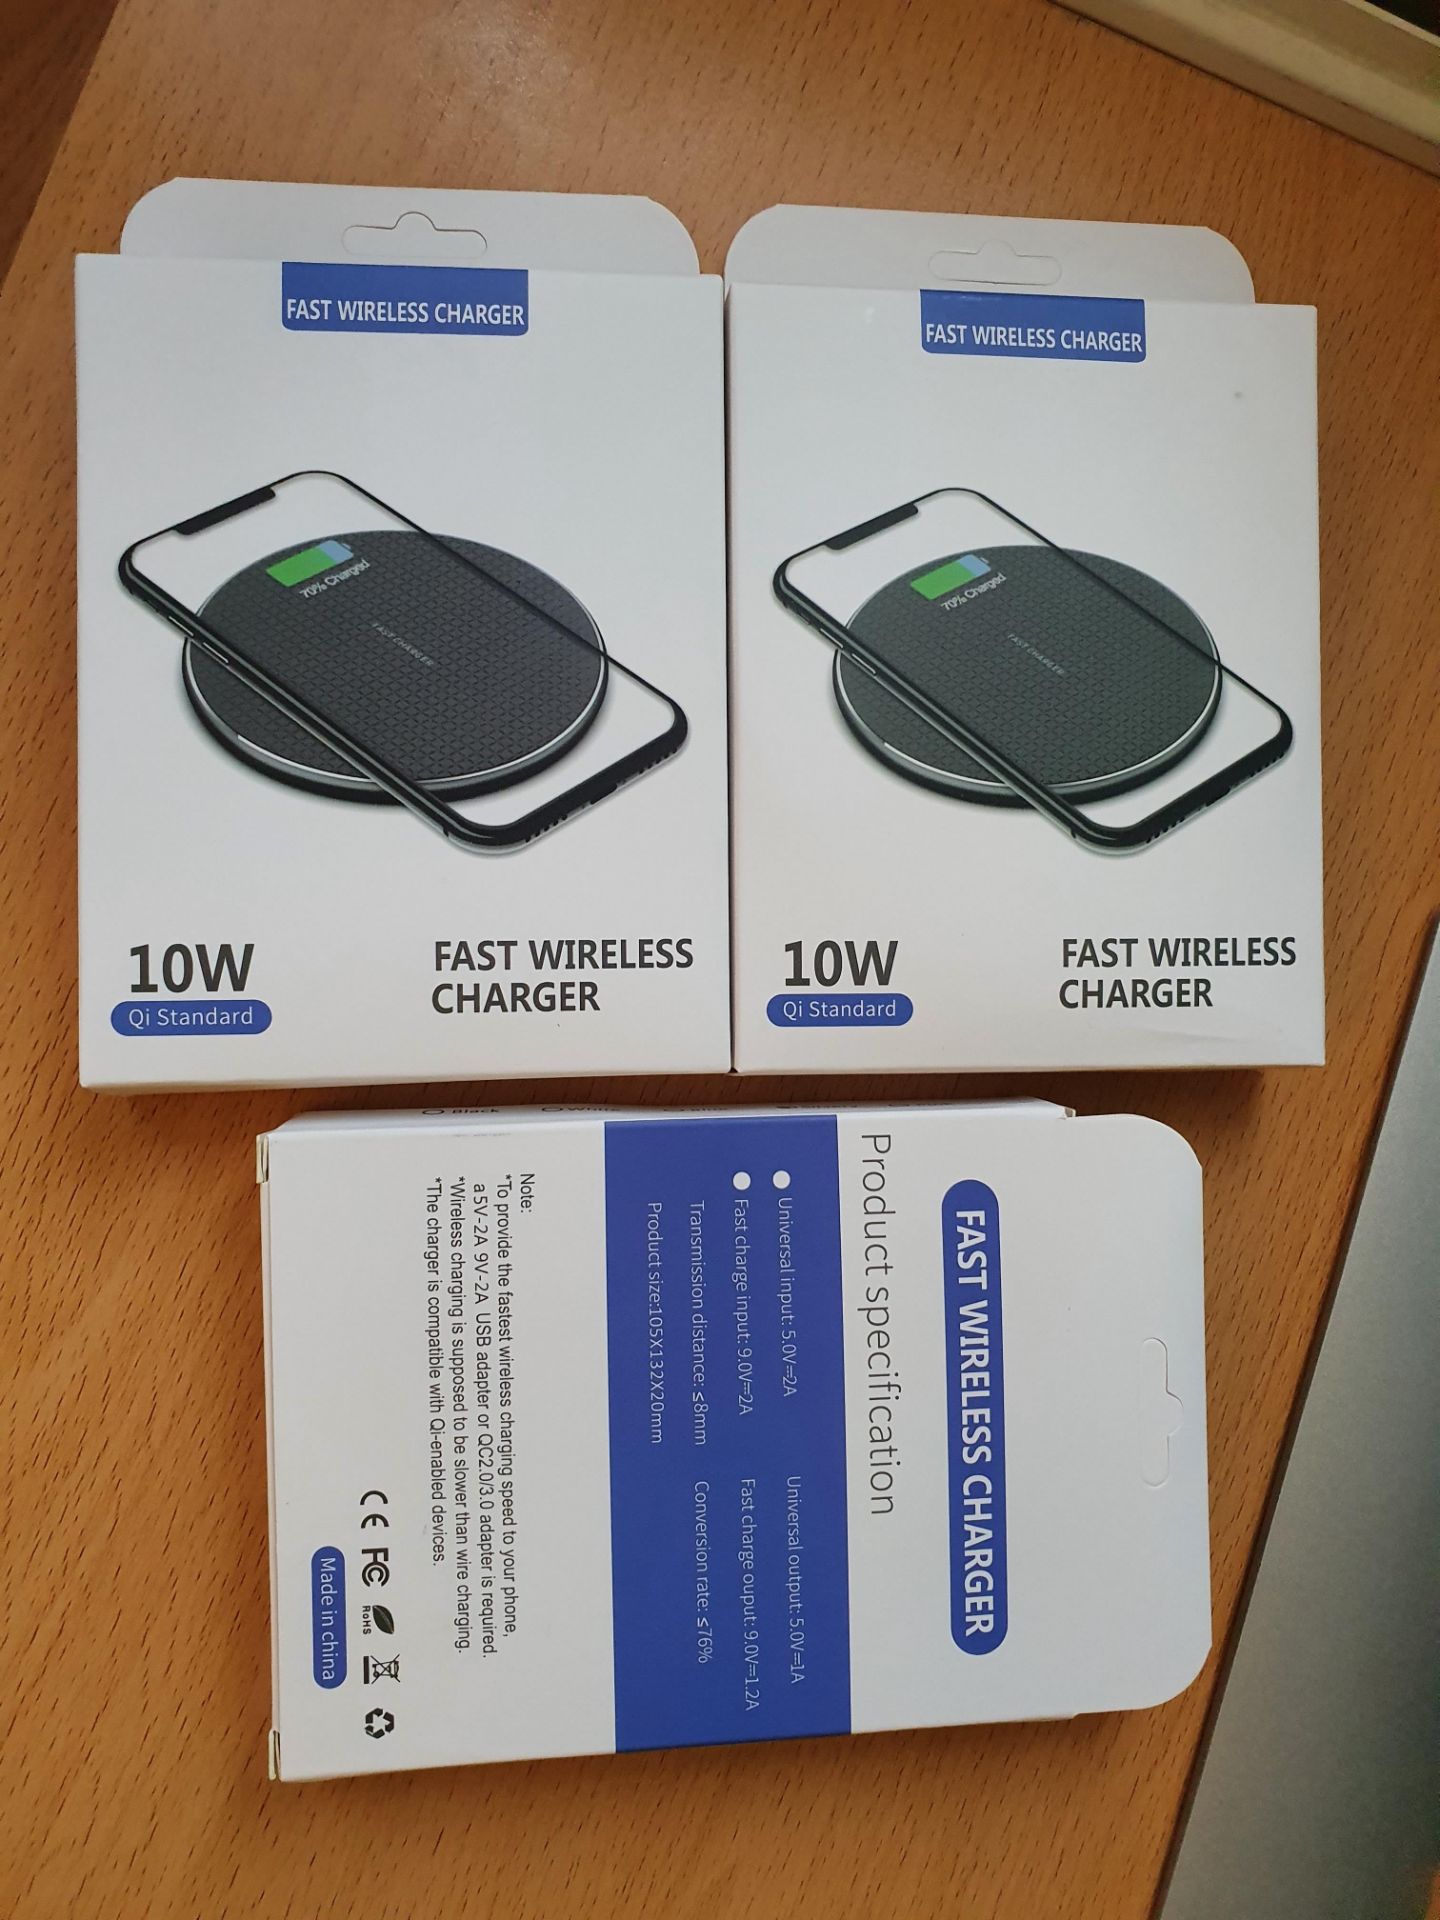 3 x Brand New Super Fast 10W Wireless Charger for Apple Samsung Huawei LG etc RRP£45